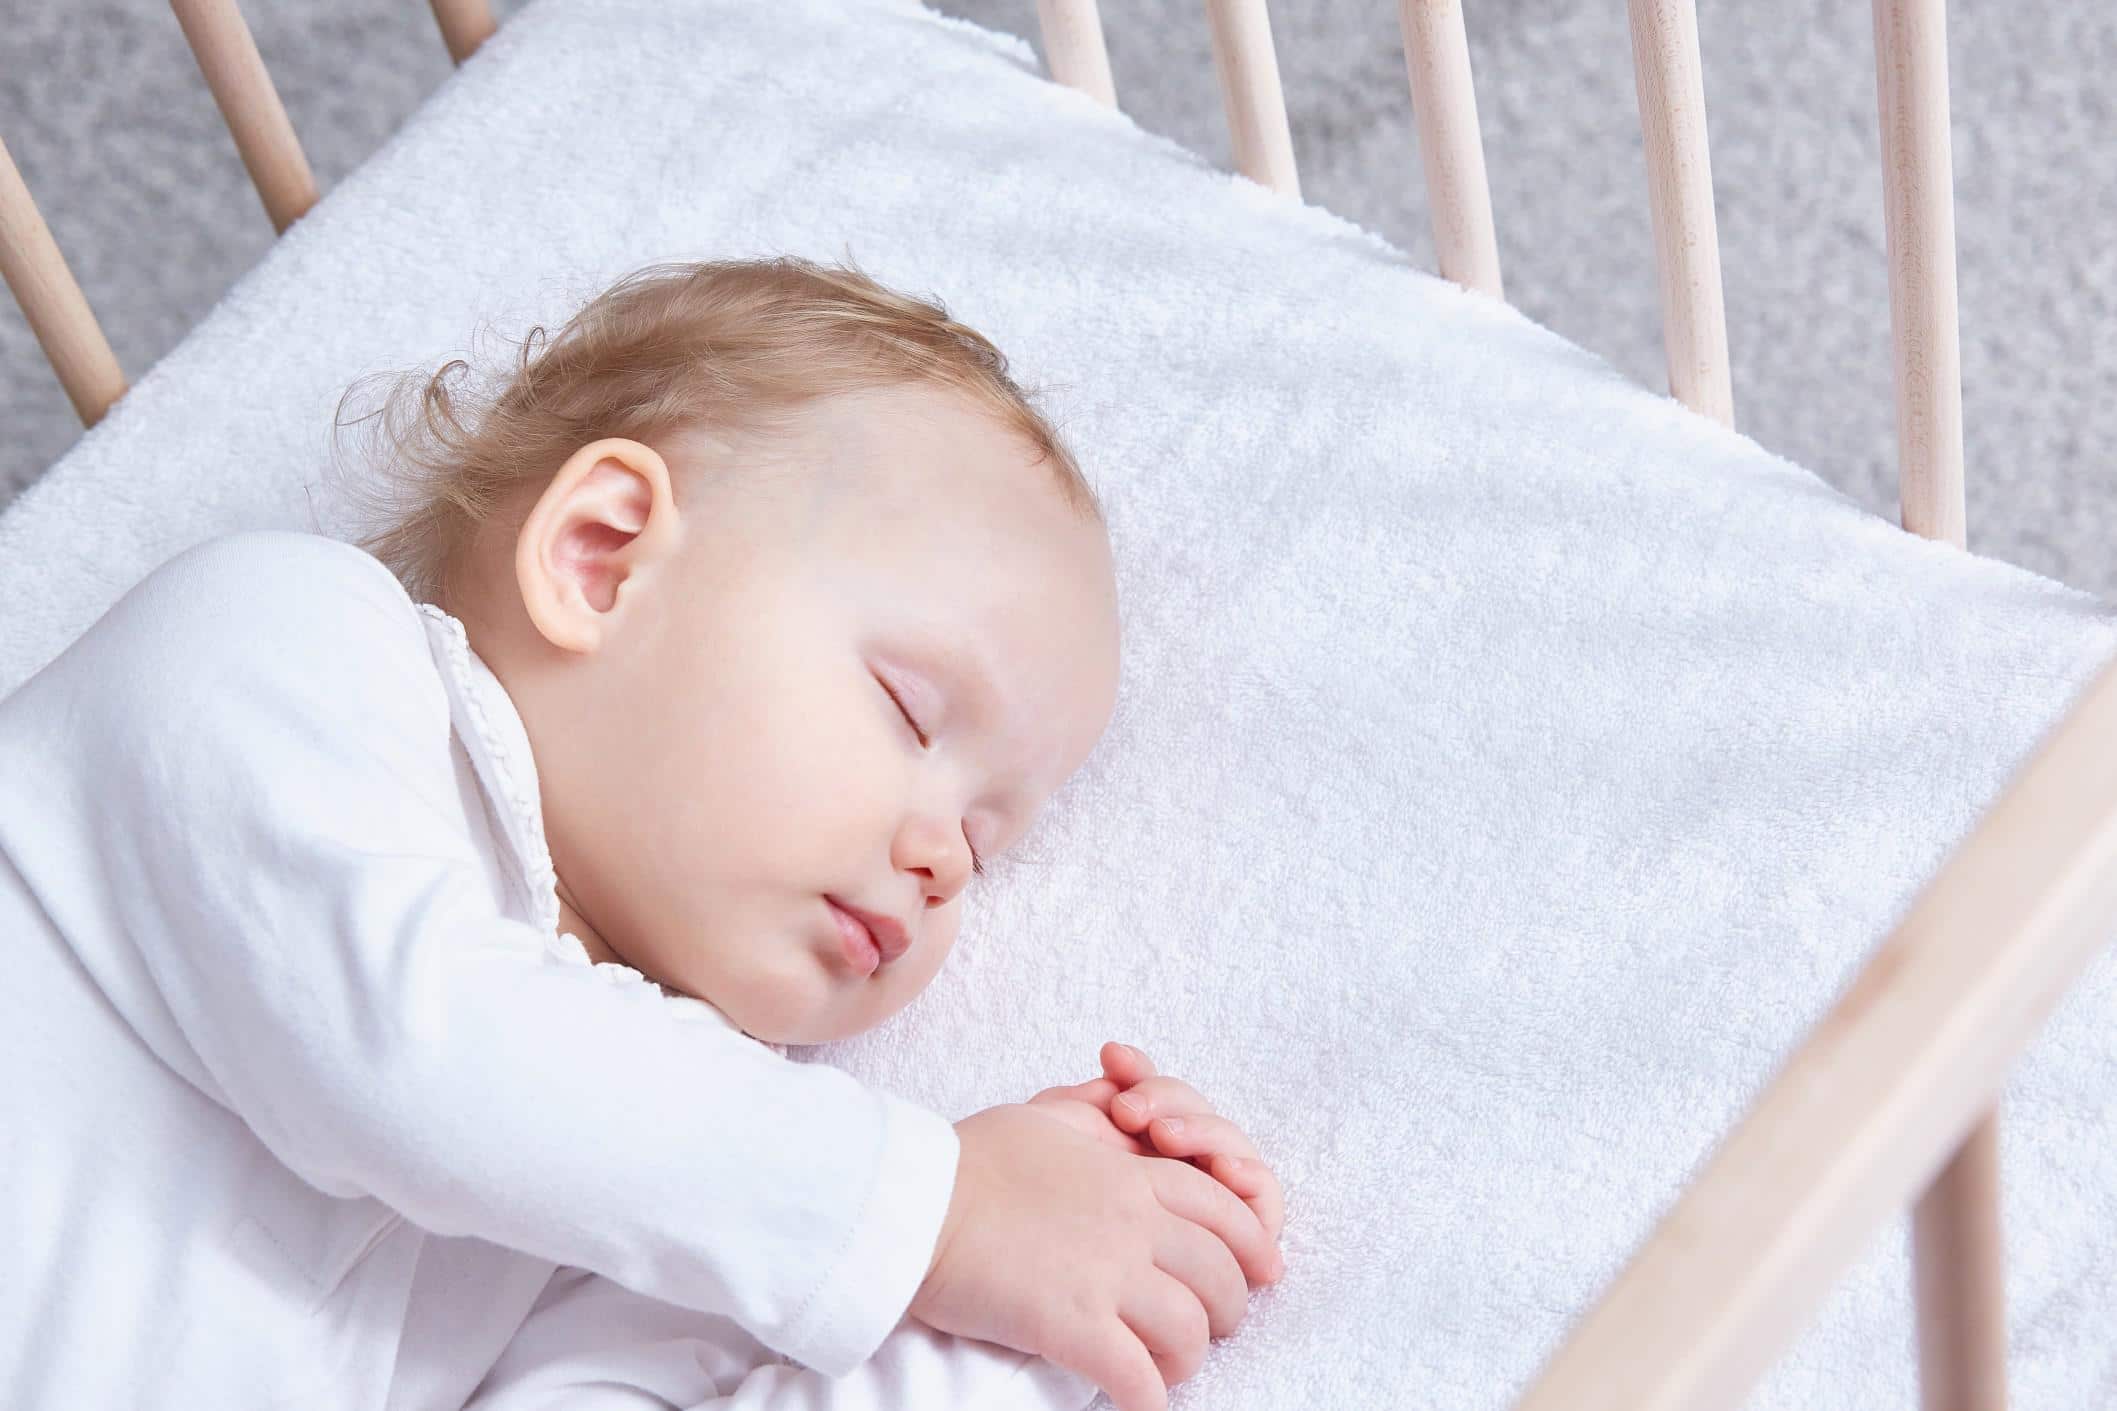 12-month-old baby sleeping in a crib with its hands together